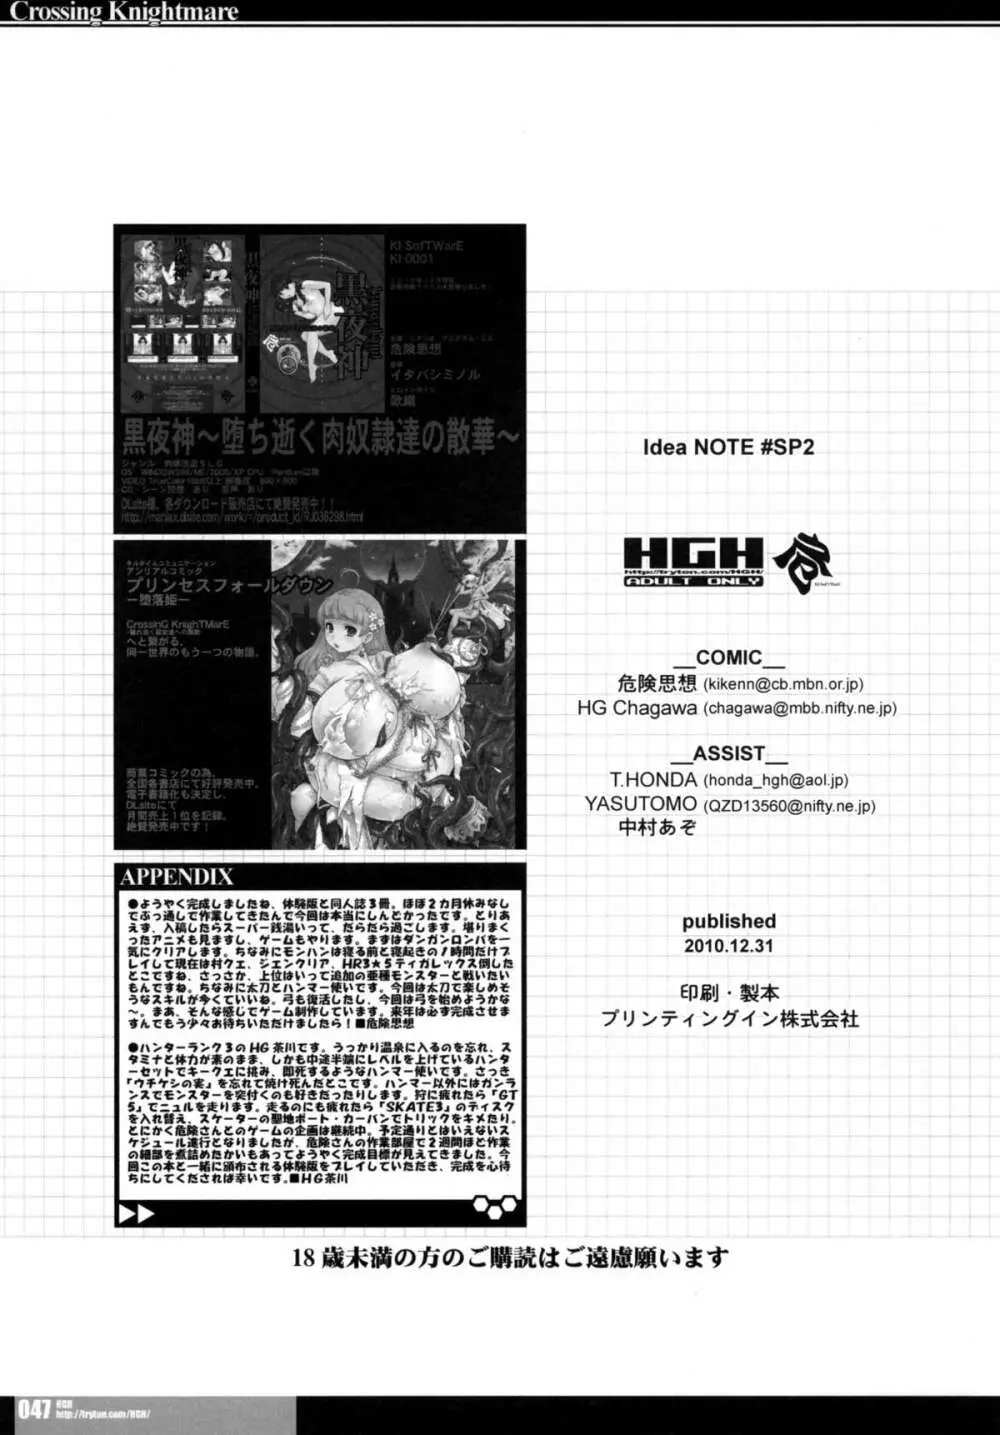 [HGH、DANGEROUS THOUGHTS、KI-SofTWarE (HG茶川、危険思想)] CrossinGKnighTMarE ~穢れ逝く聖女達への讃歌~ IdeaNOTE SP2 [DL版] Page.47